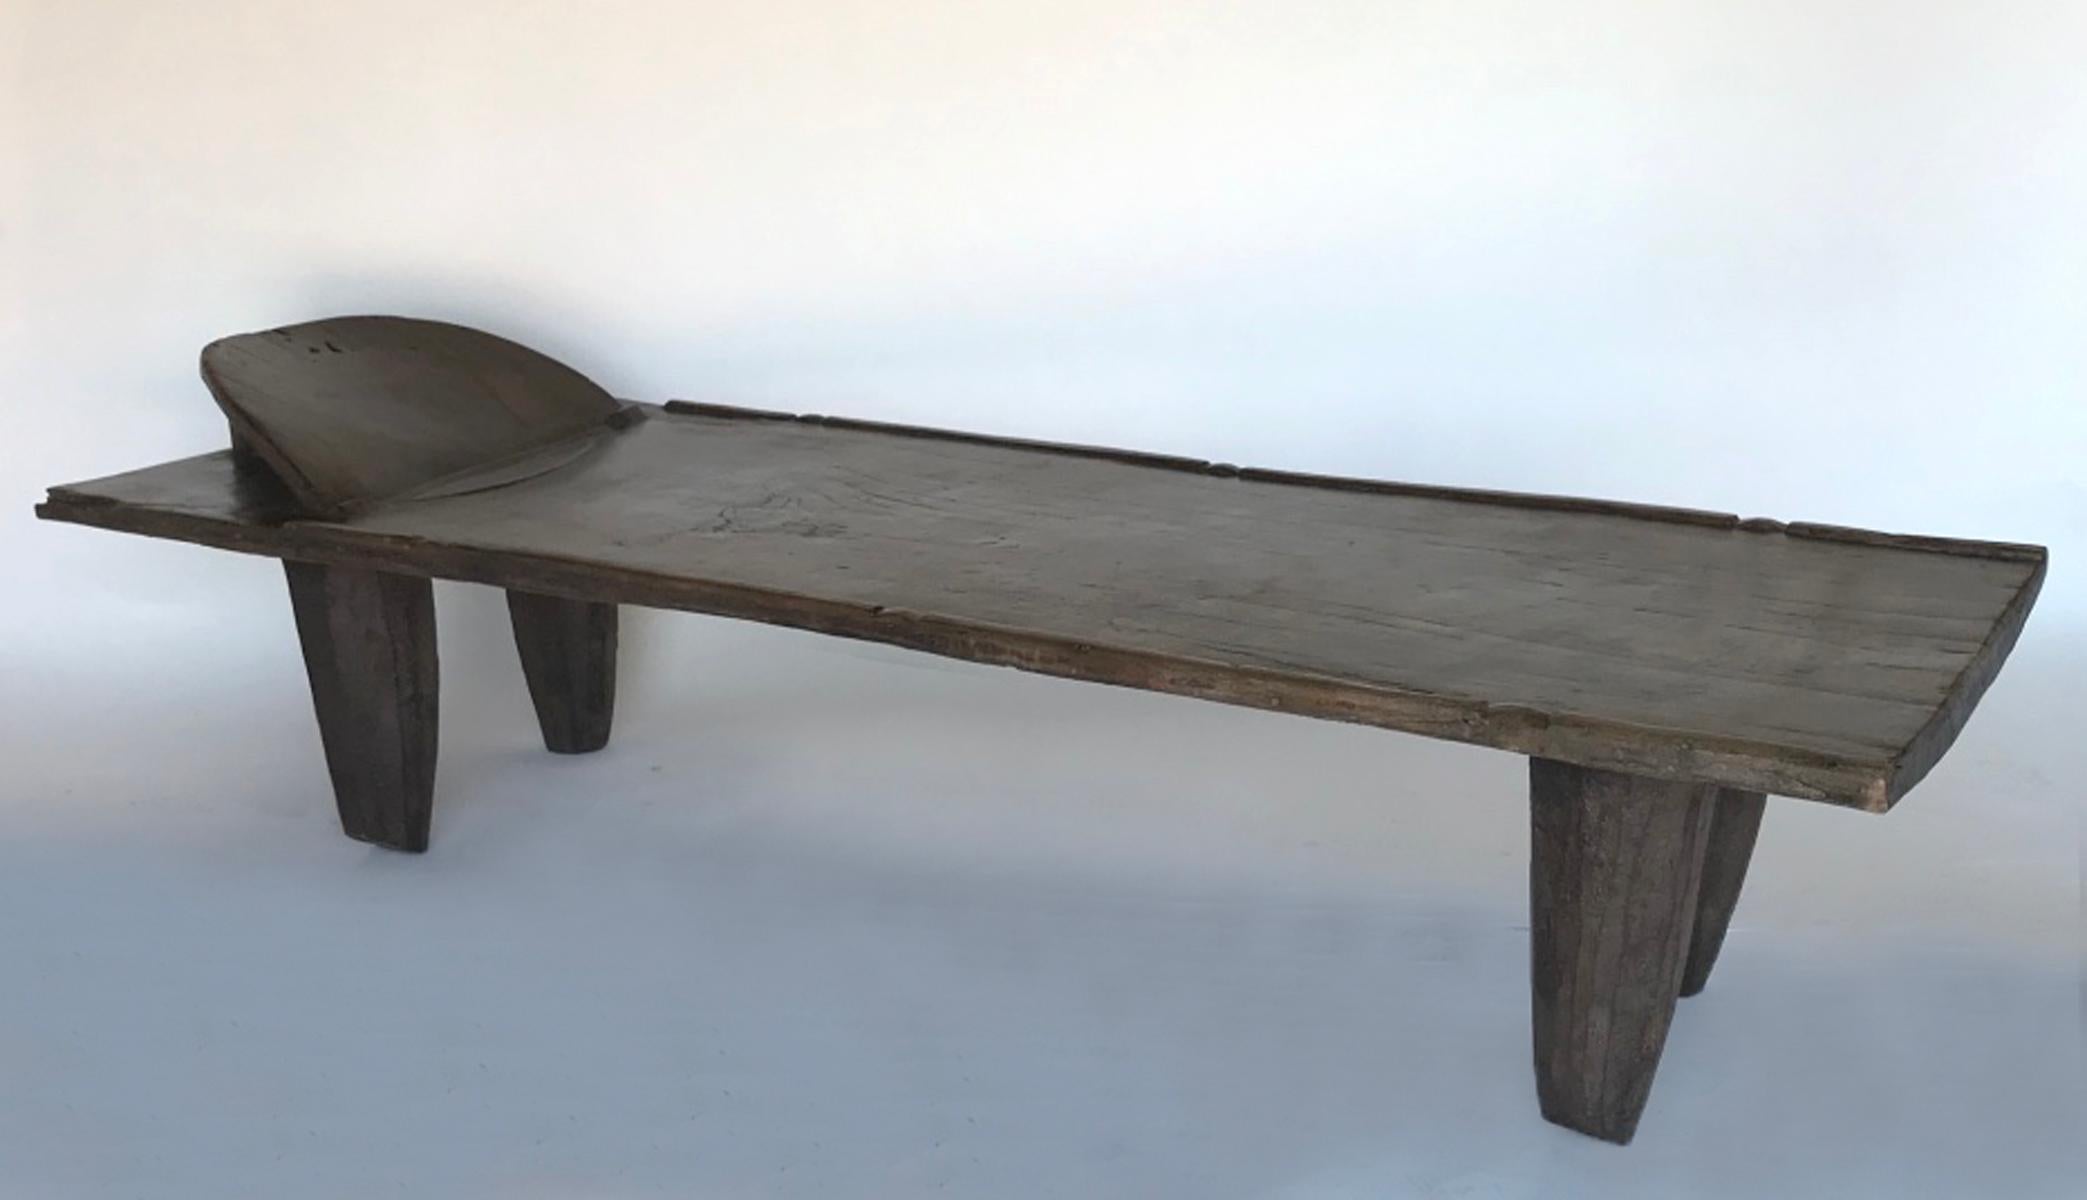 Old large wooden bed carved out of one piece of wood. Conical legs, headrest and carved detail on top. Beautiful, worn wood, smooth lovely patina. Mali. Legs and top all carved out of one piece of wood. Age appropriate wear, see photos. Top of